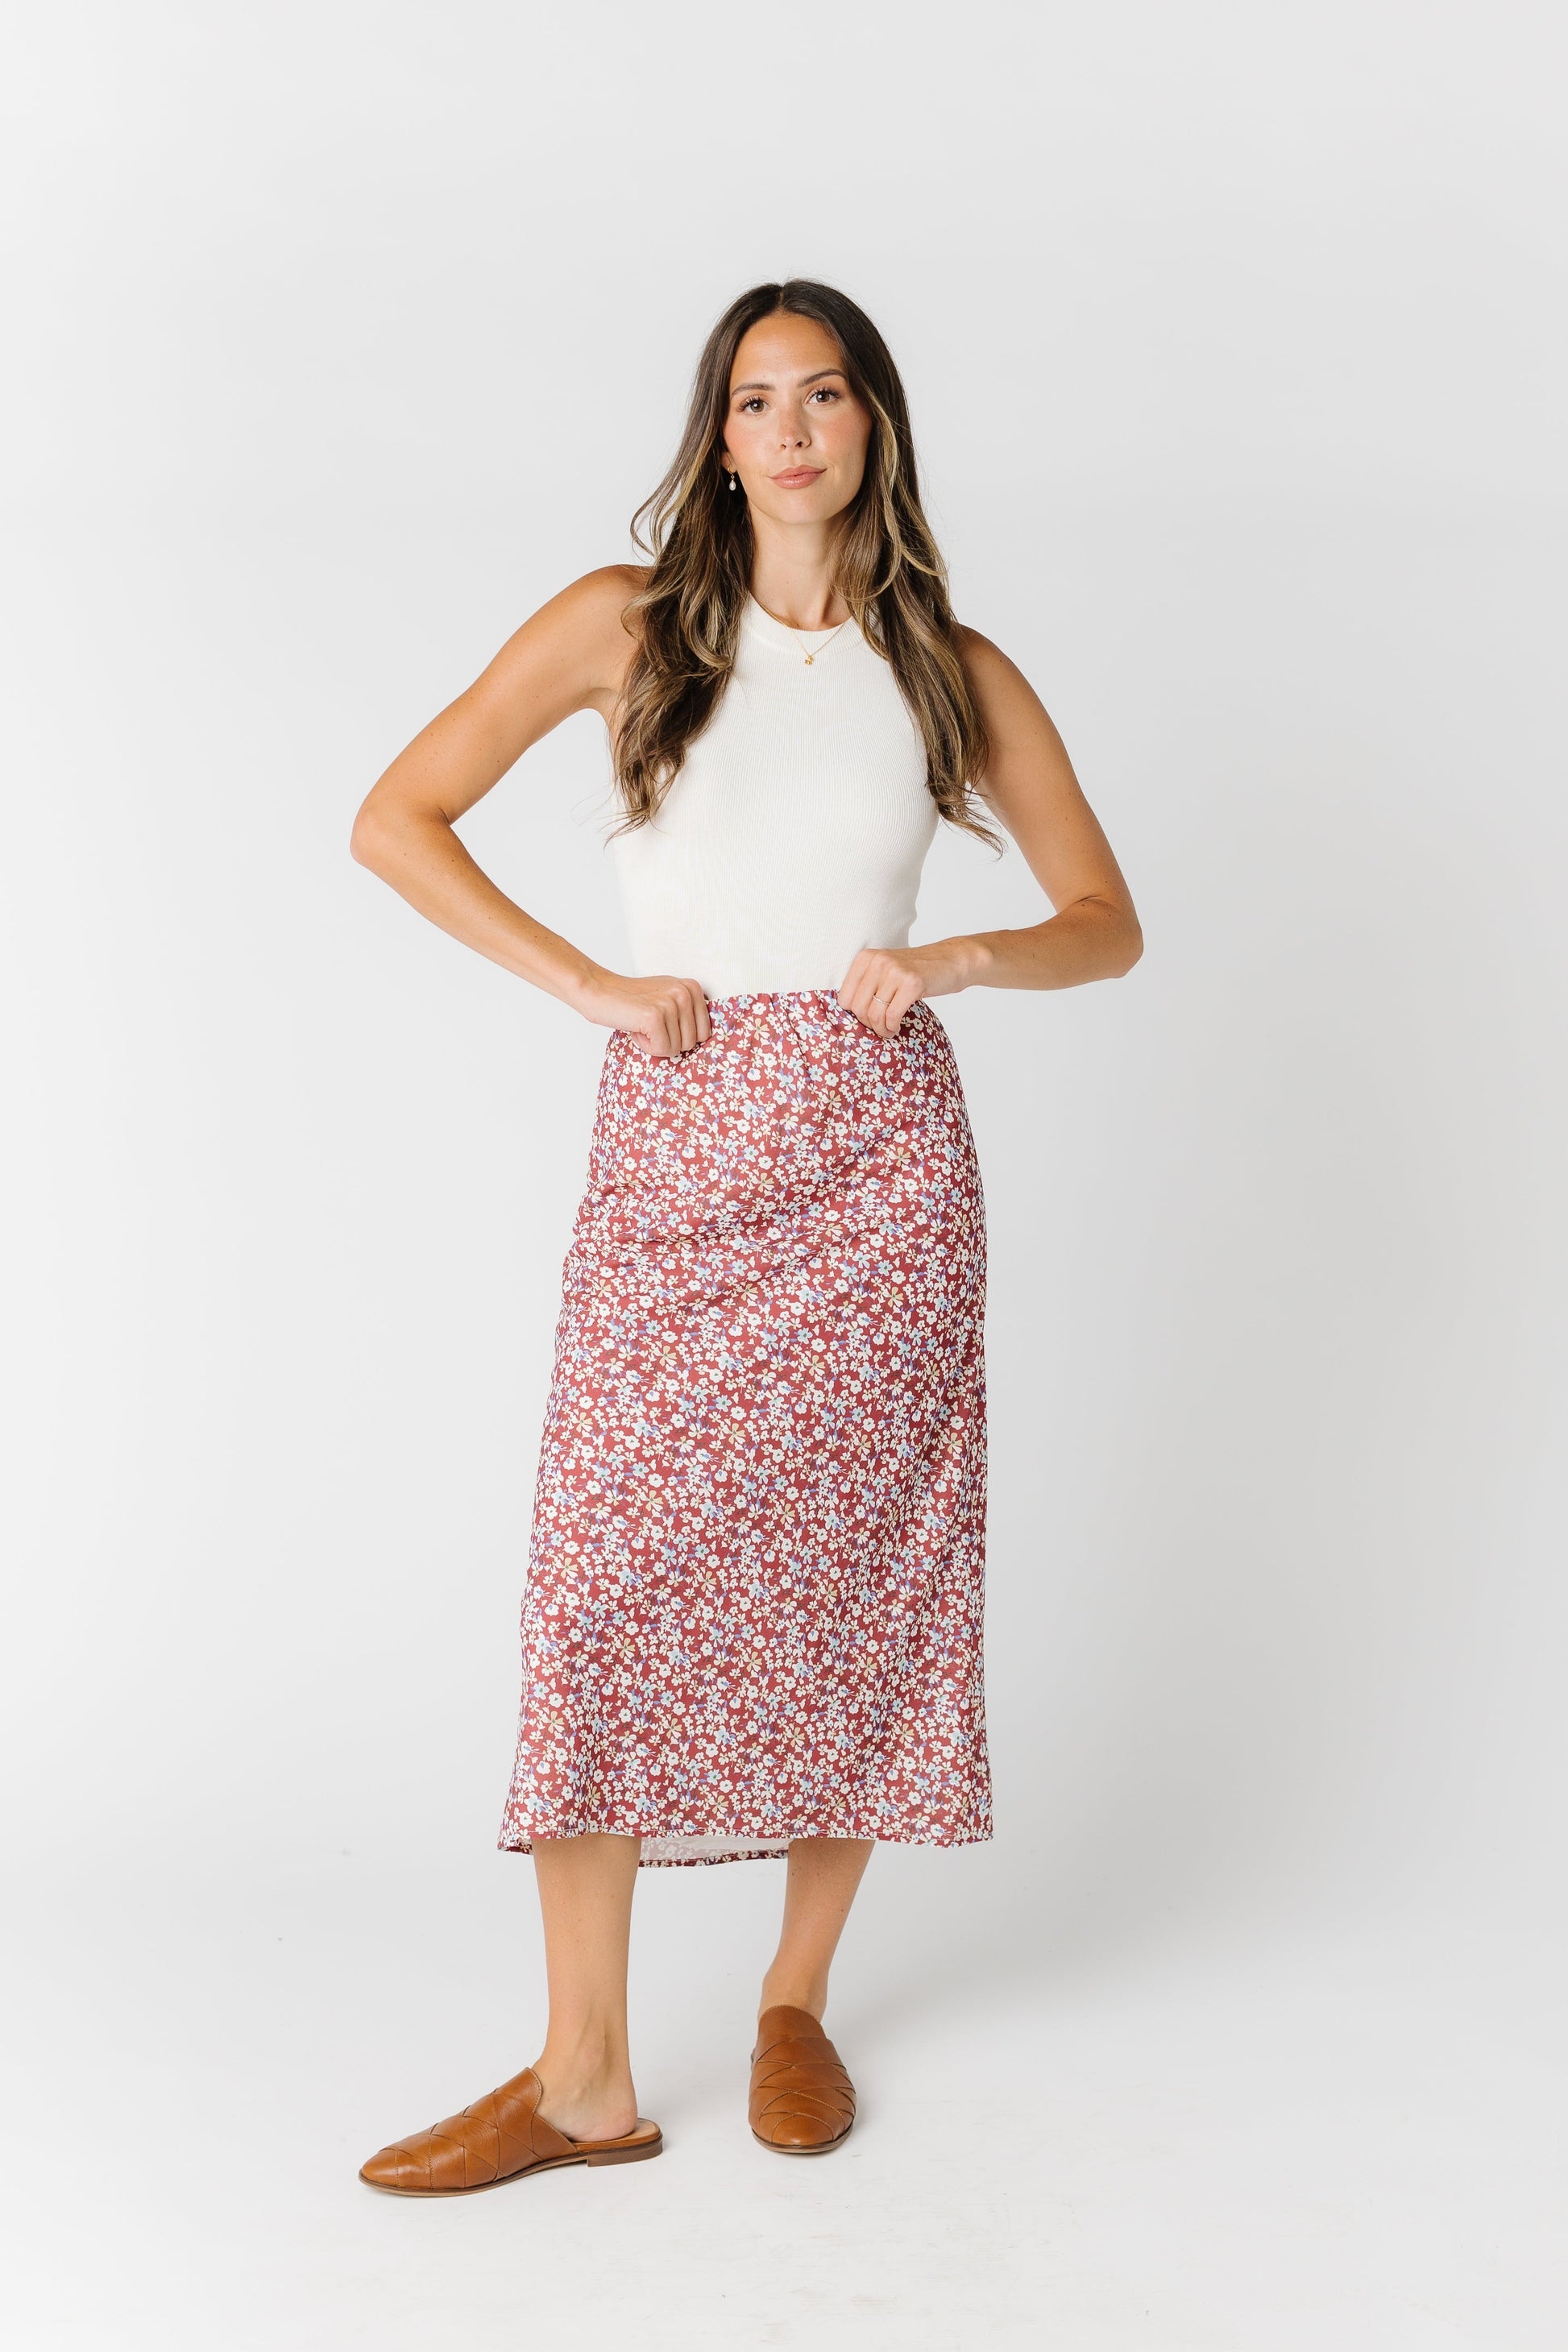 Brass & Roe Mable Floral Skirt WOMEN'S SKIRTS brass & roe Rust L 